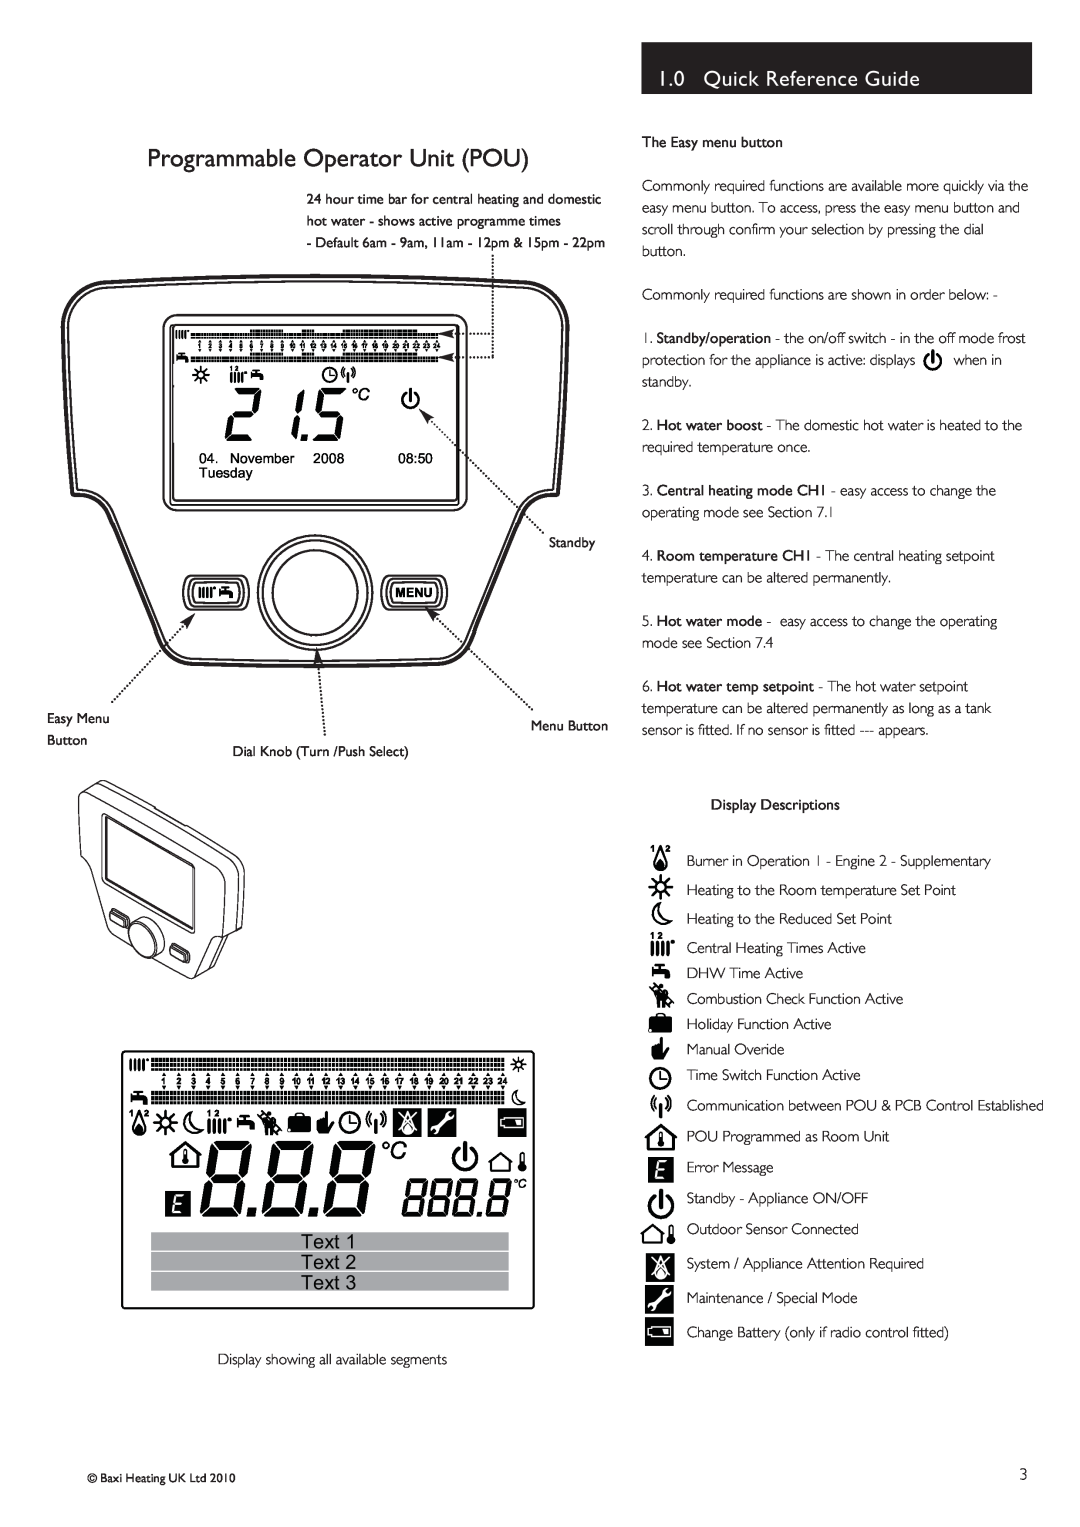 Baxi Potterton 24/1.0 operating instructions Quick Reference Guide, Text, Programmable Operator Unit POU 